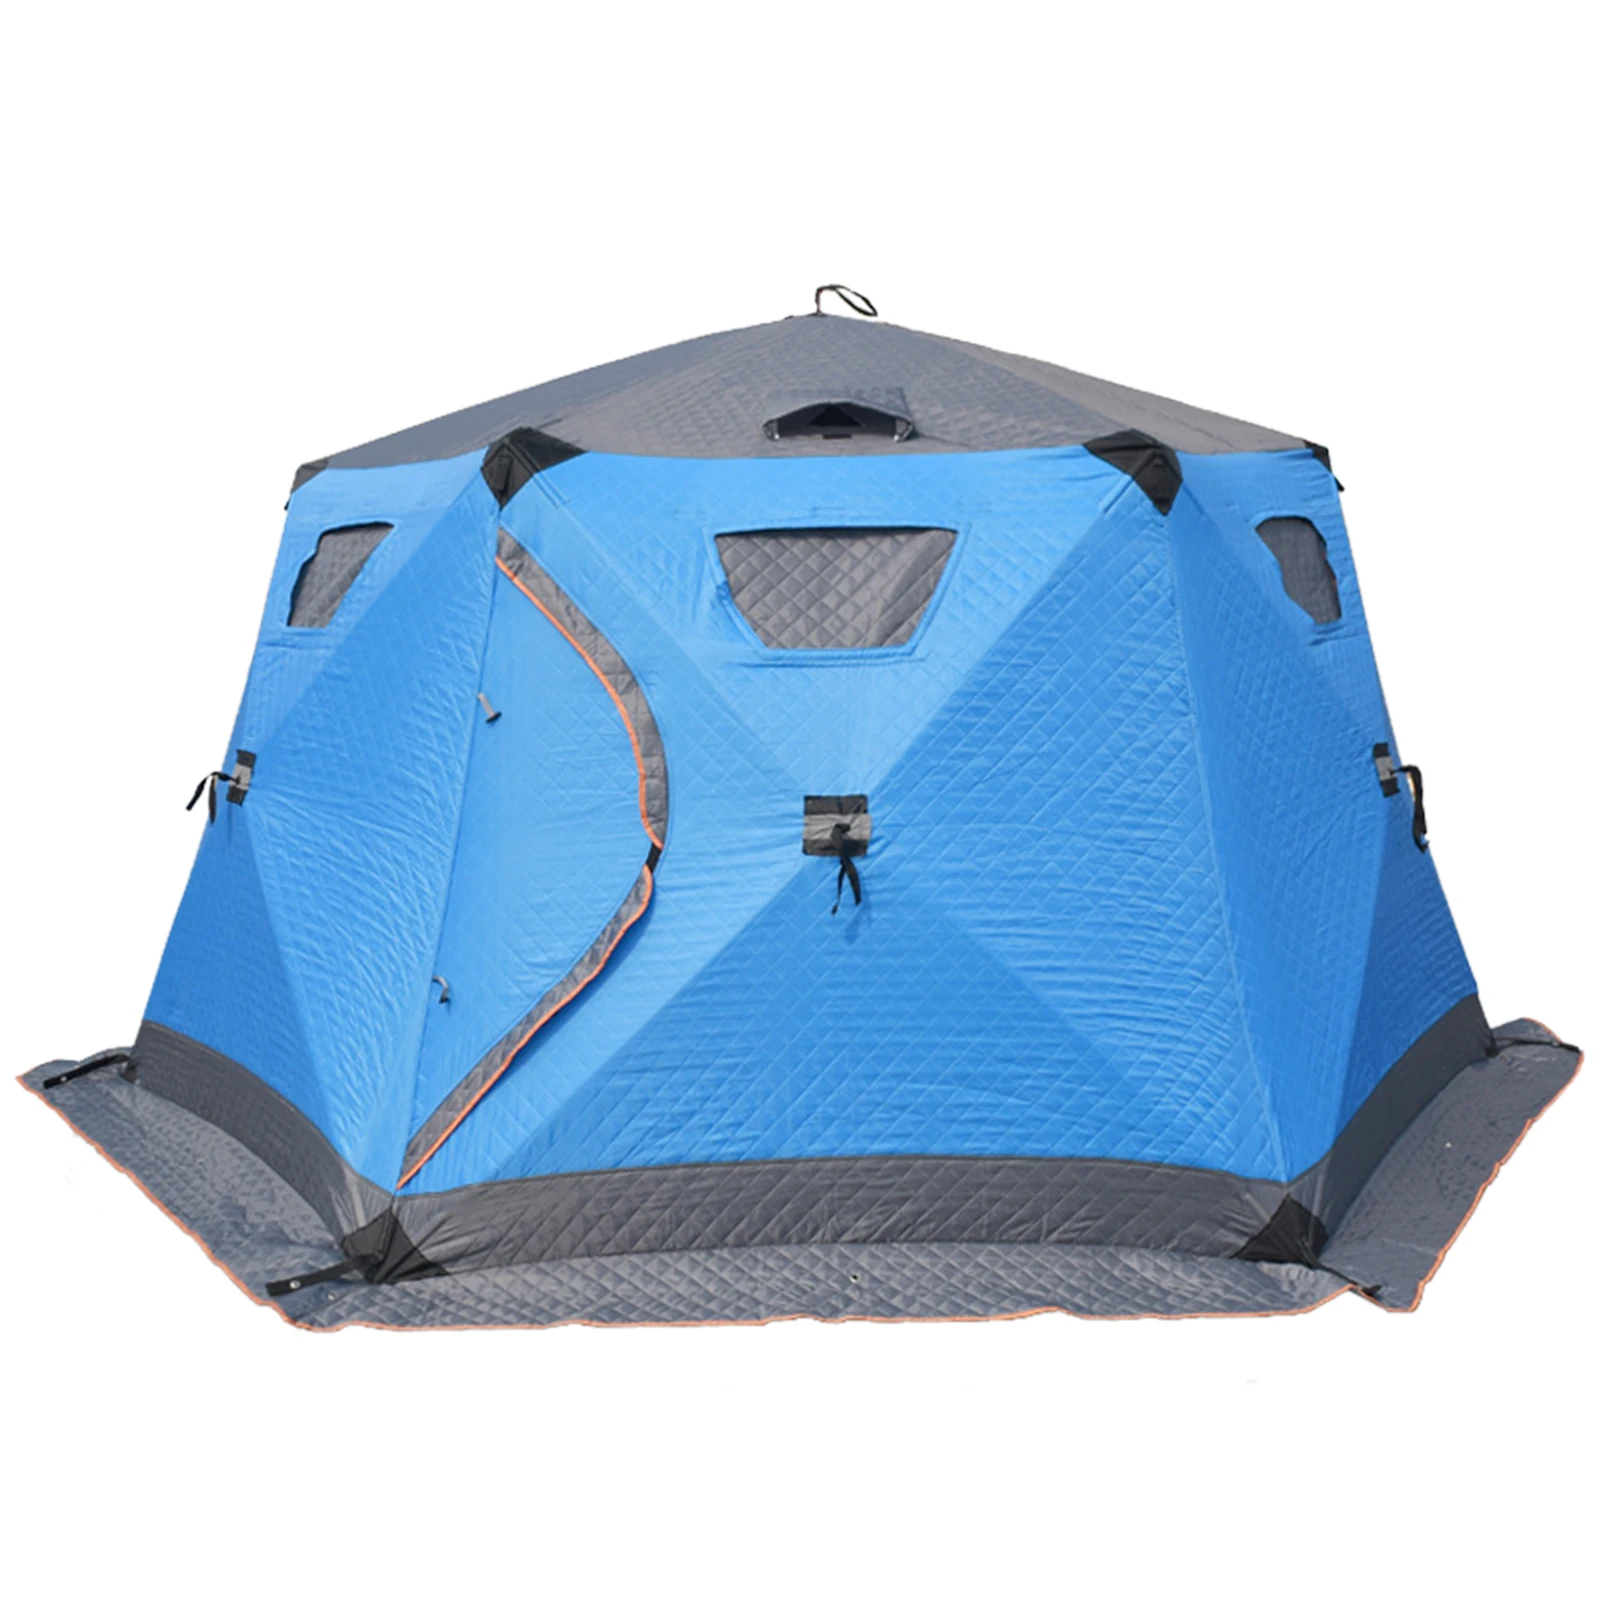 Fishing Tent for Winter Fishing Camping and Outdoor Activities